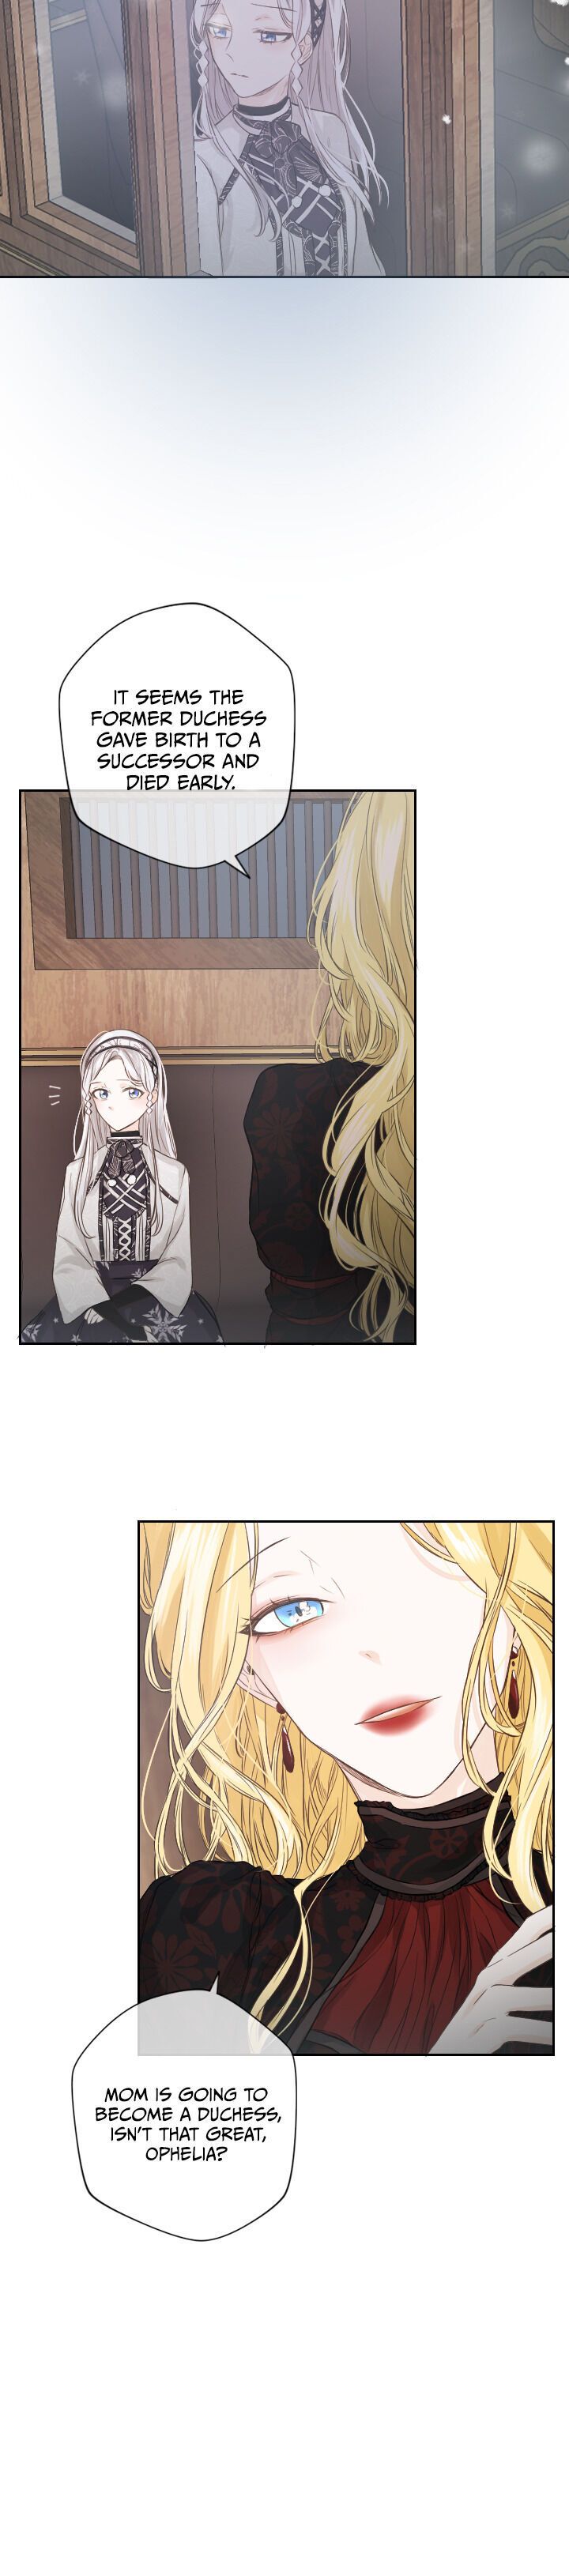 The Reason Why Ophelia Can’t Get Away From The Duke Chapter 1 page 25